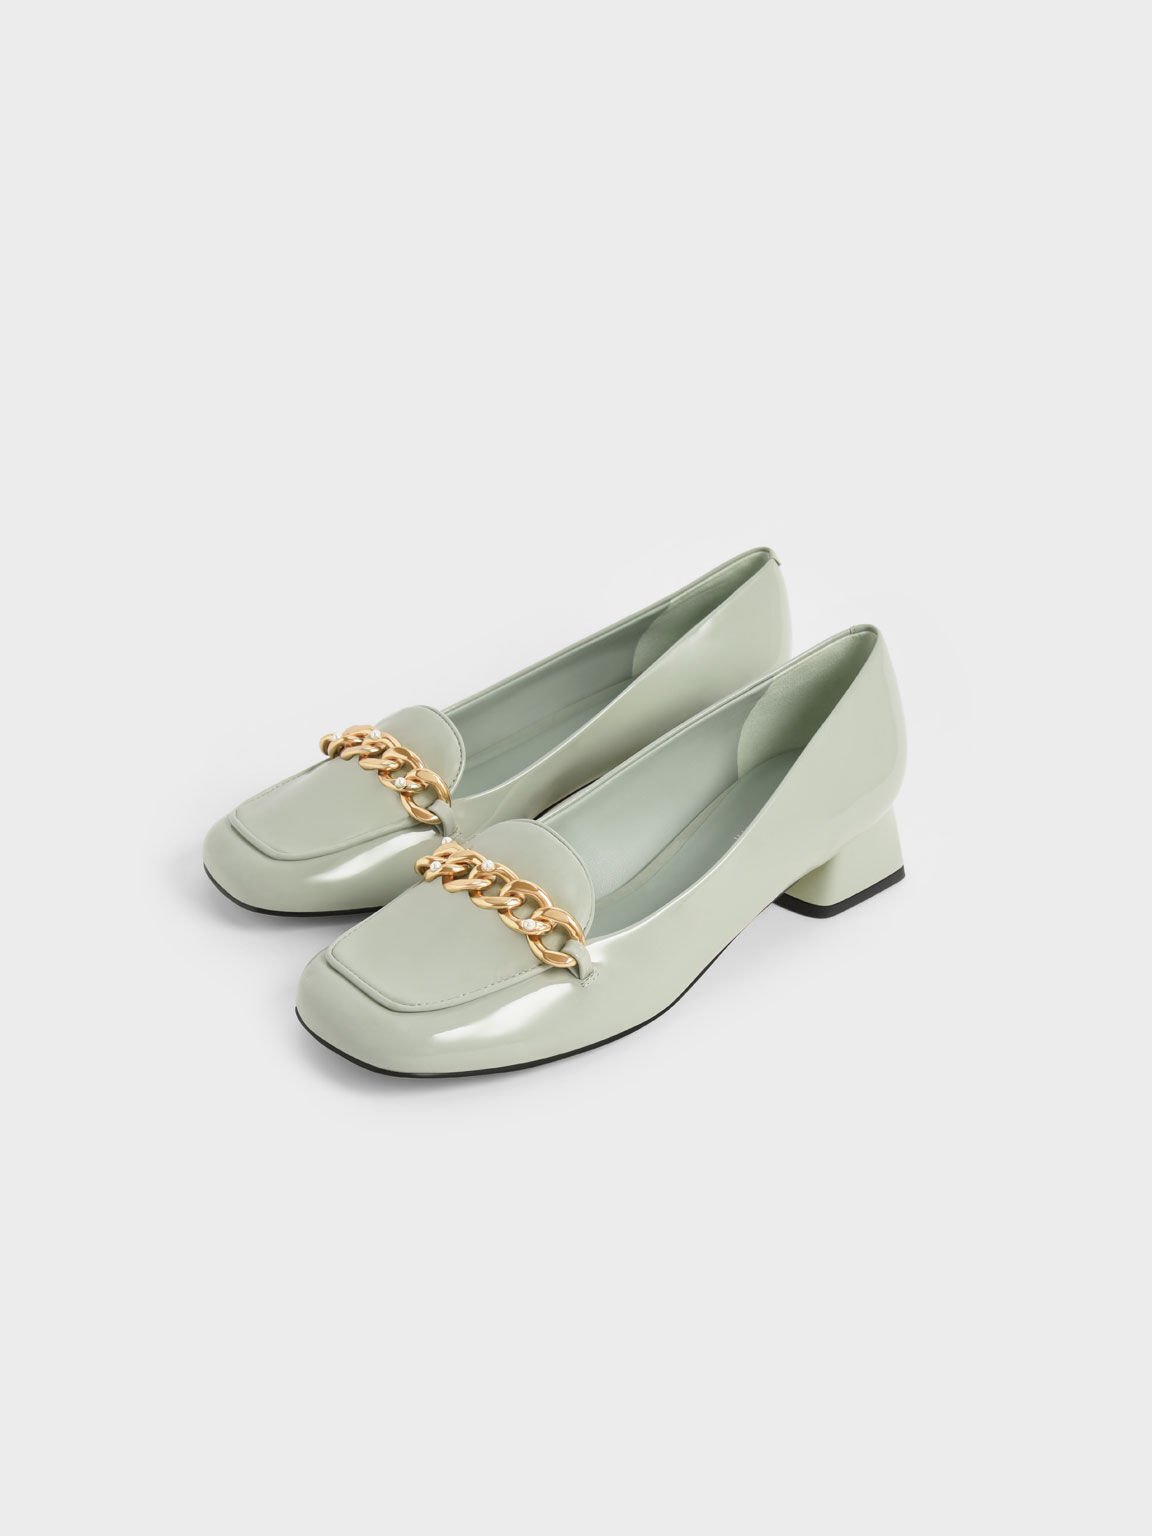 Chain-Link Patent Loafers, Sage Green, hi-res